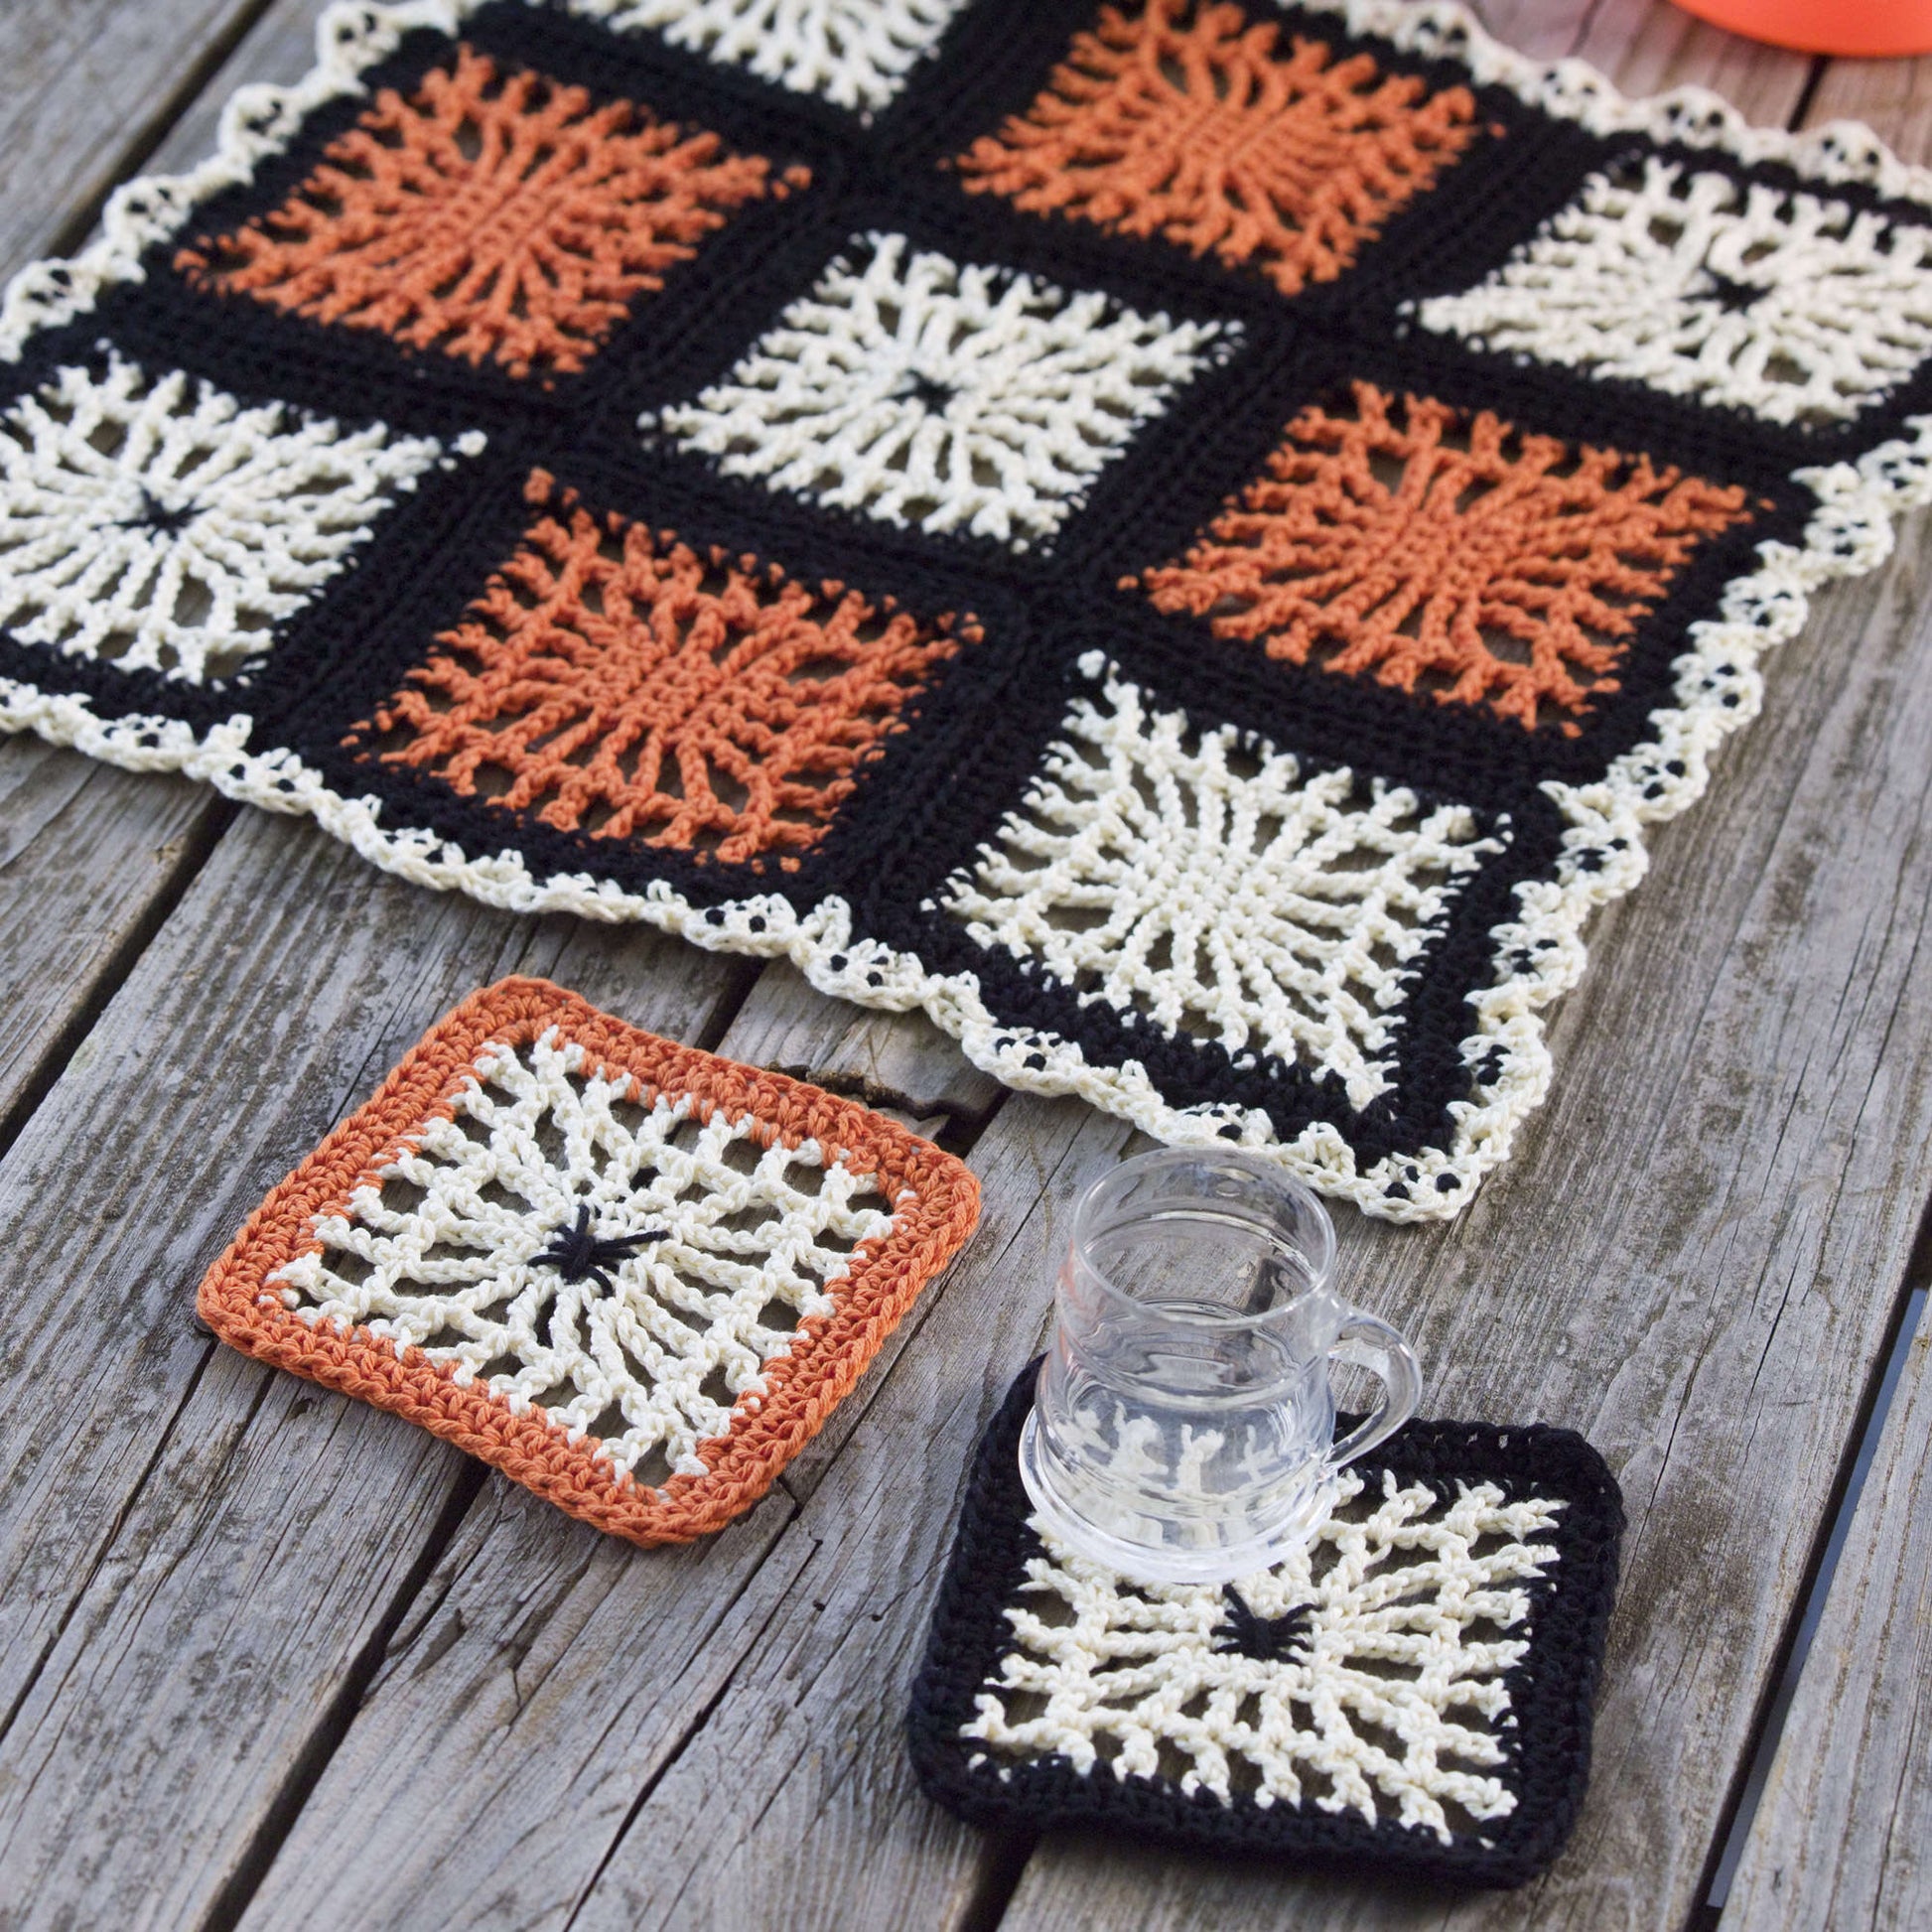 Free Red Heart Spiderweb Coasters And Halloween Table Center Crochet Pattern